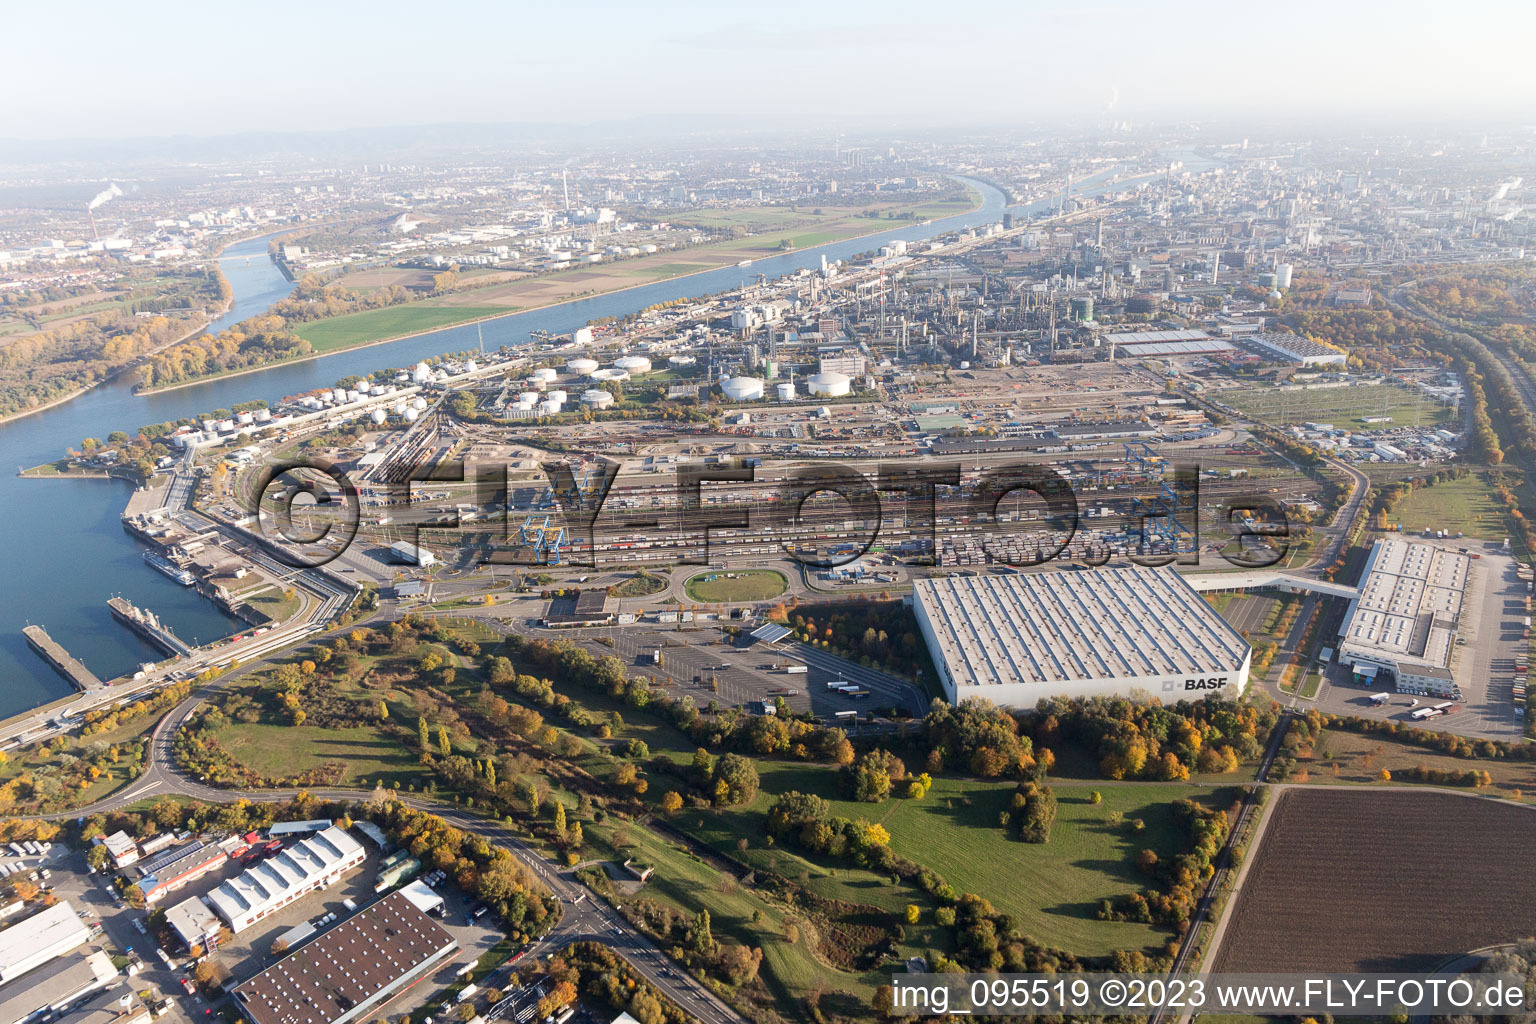 Aerial photograpy of North in the district BASF in Ludwigshafen am Rhein in the state Rhineland-Palatinate, Germany